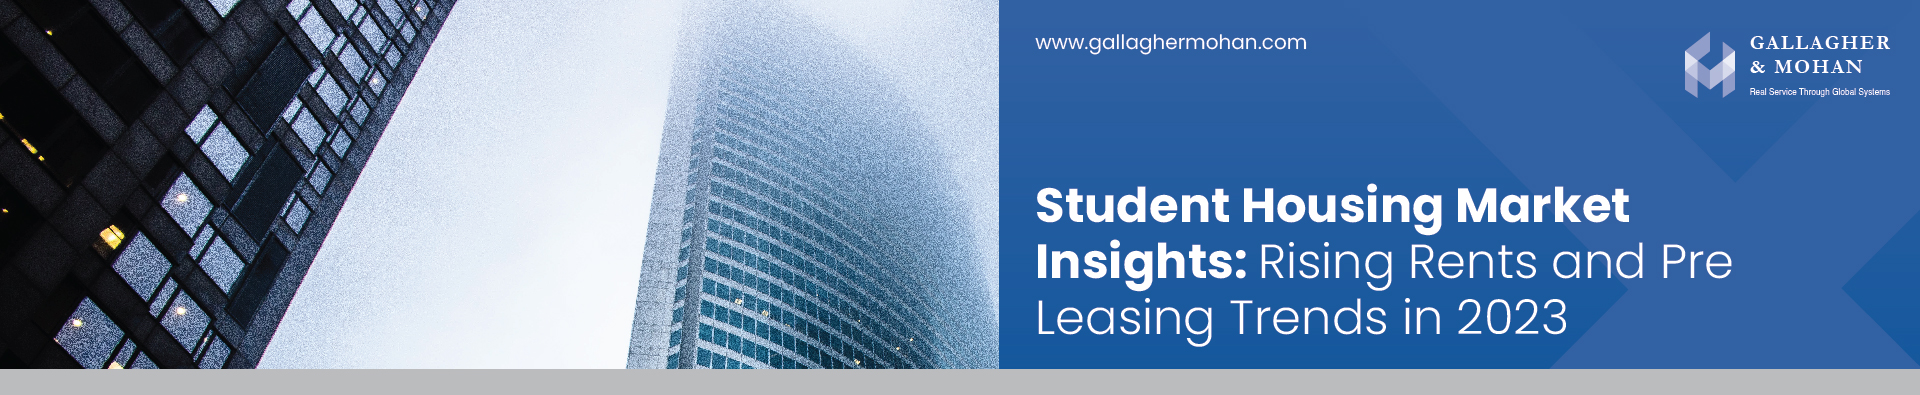 Student Housing Market Insights Rising Rents And Pre Leasing Trends In 2023